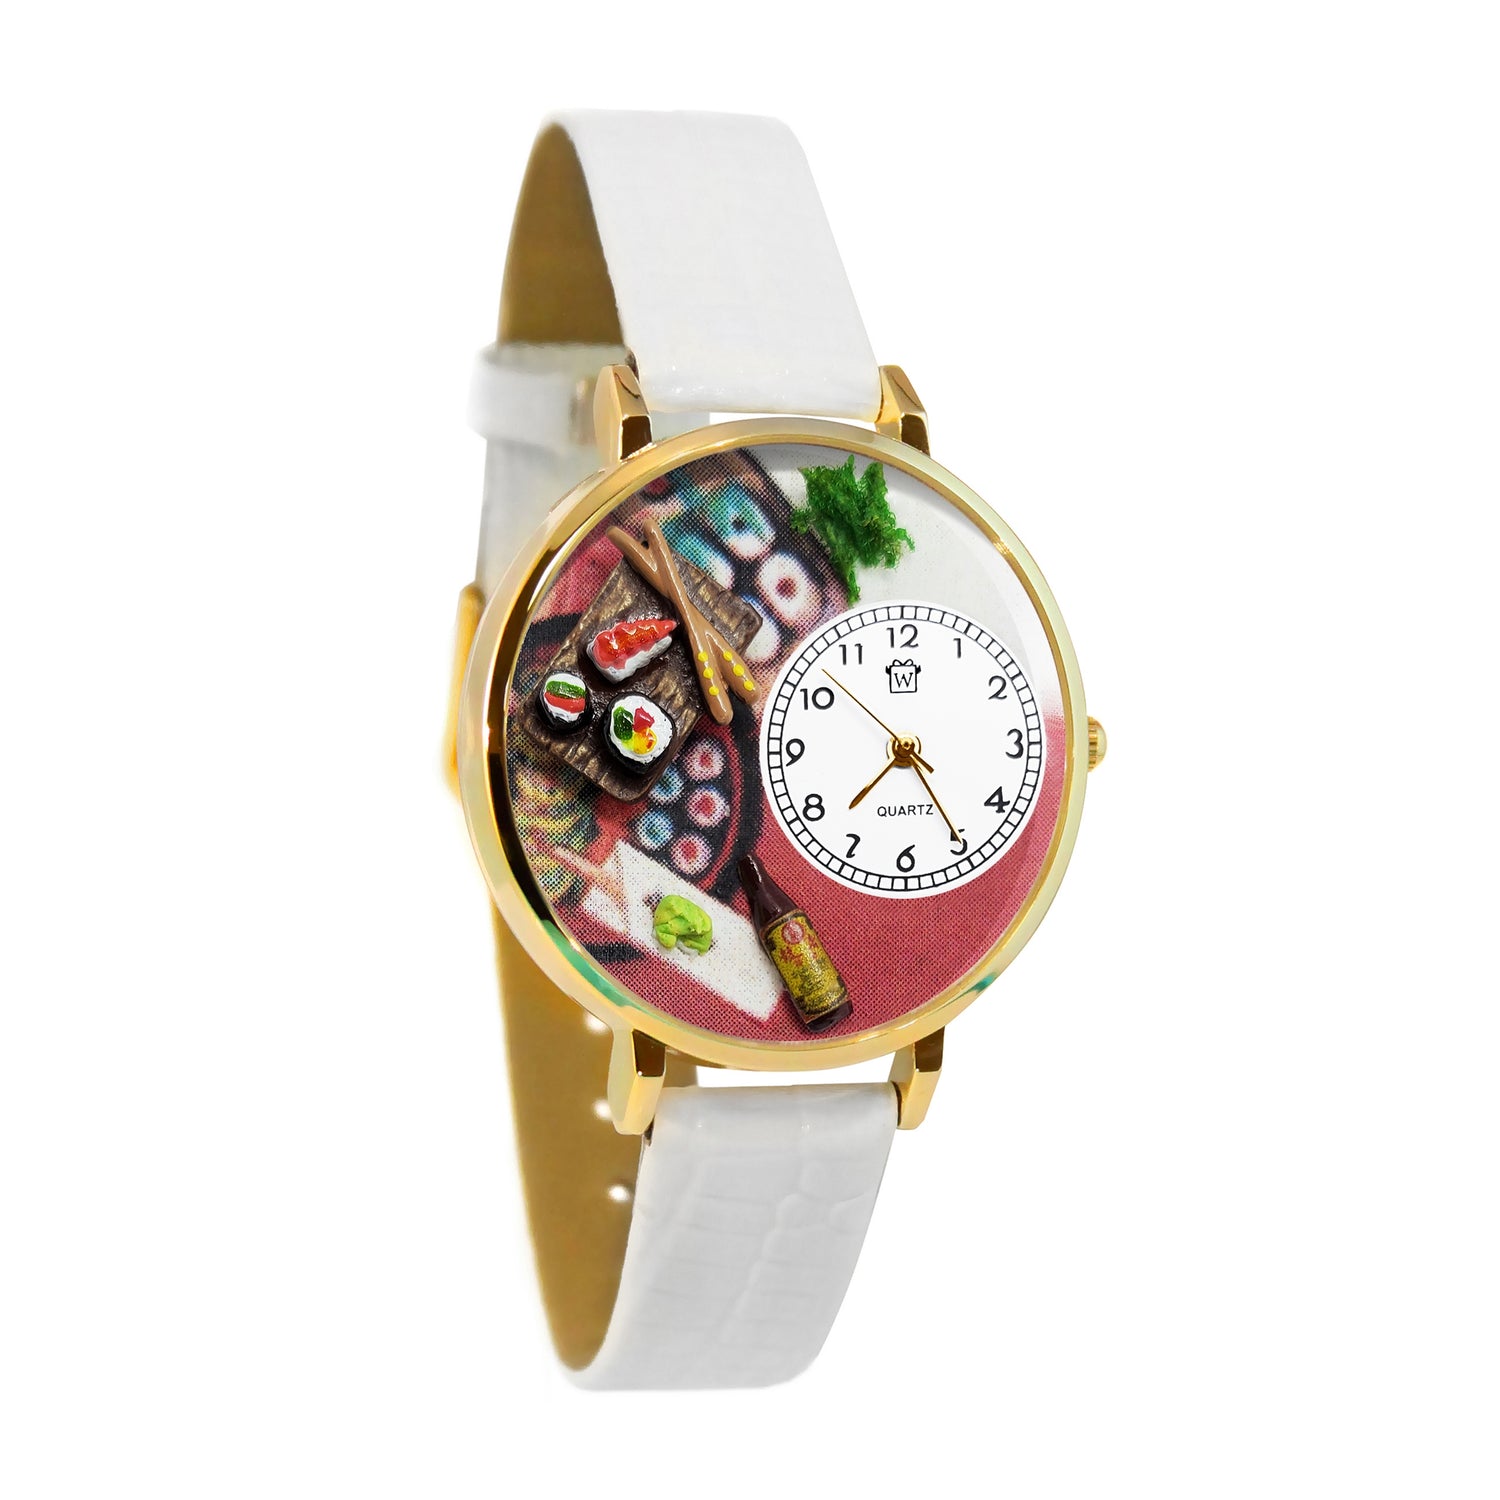 Whimsical Gifts | Sushi 3D Watch Large Style | Handmade in USA | Hobbies & Special Interests | Food & Wine | Novelty Unique Fun Miniatures Gift | Gold Finish White Leather Watch Band